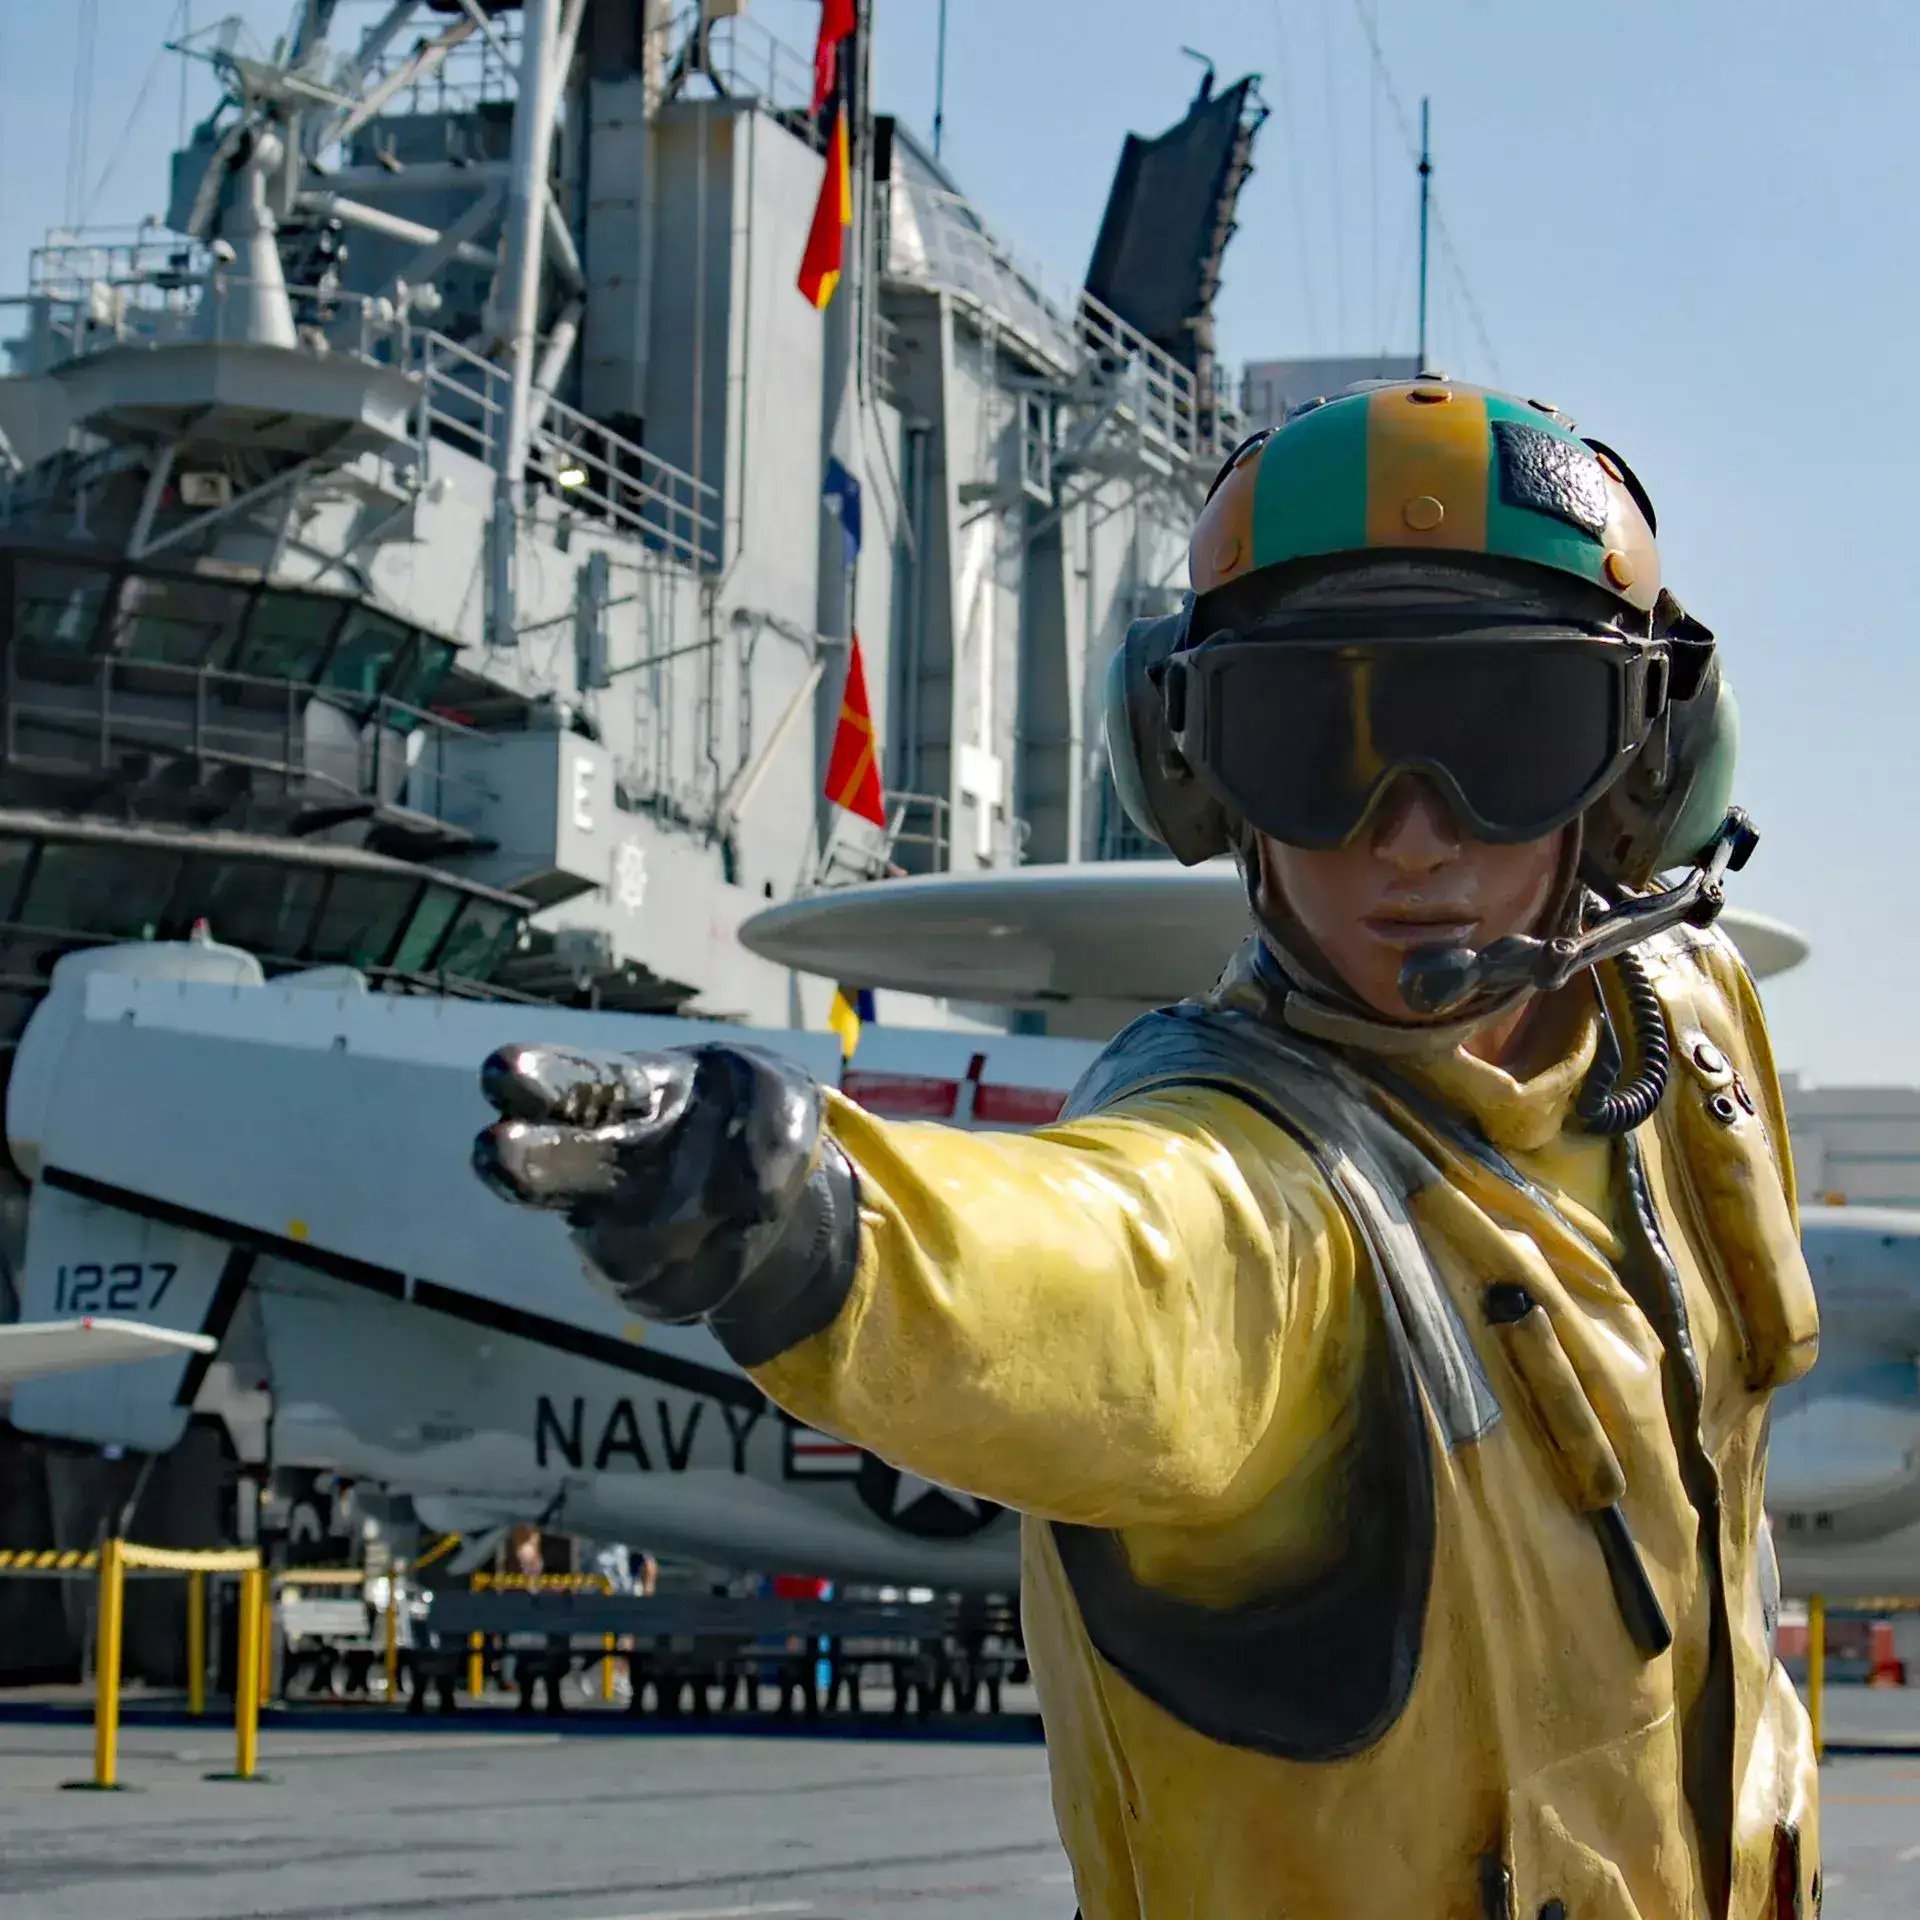 volunteer giving signal to launch jet of the deck at the USS Midway